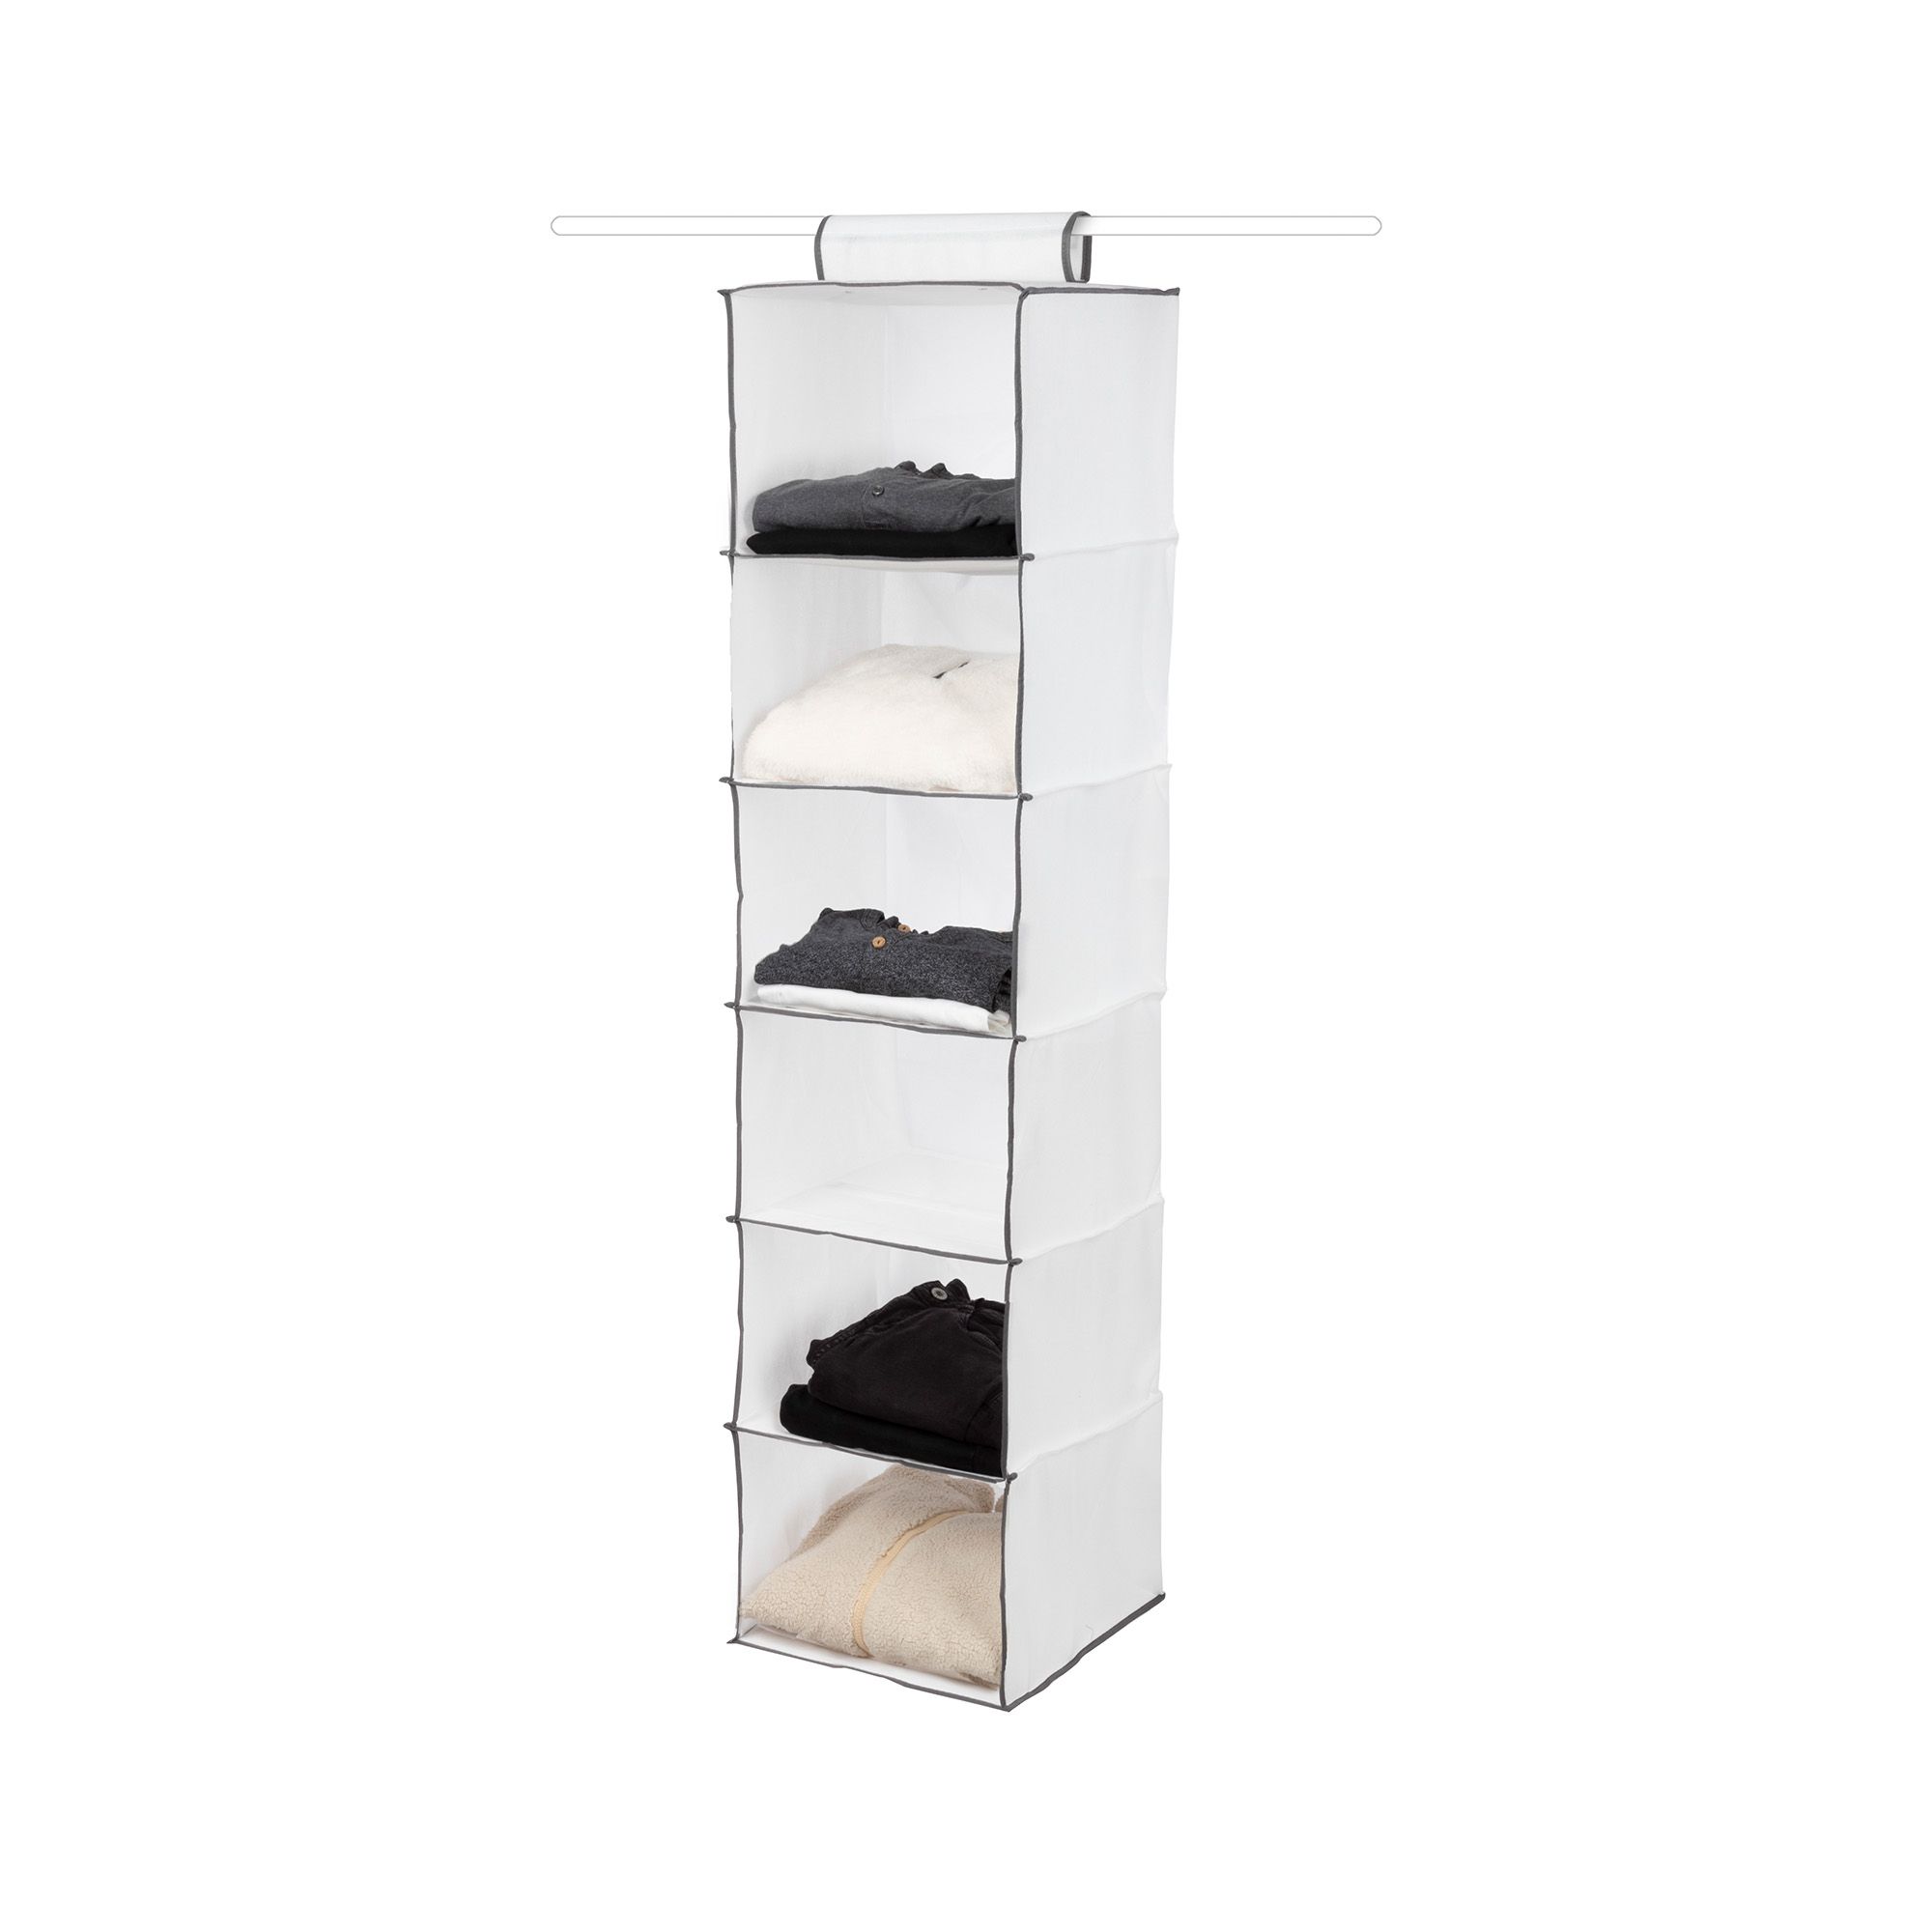 Compactor White Fabric 6 tier Shoes Hanging wardrobe organiser